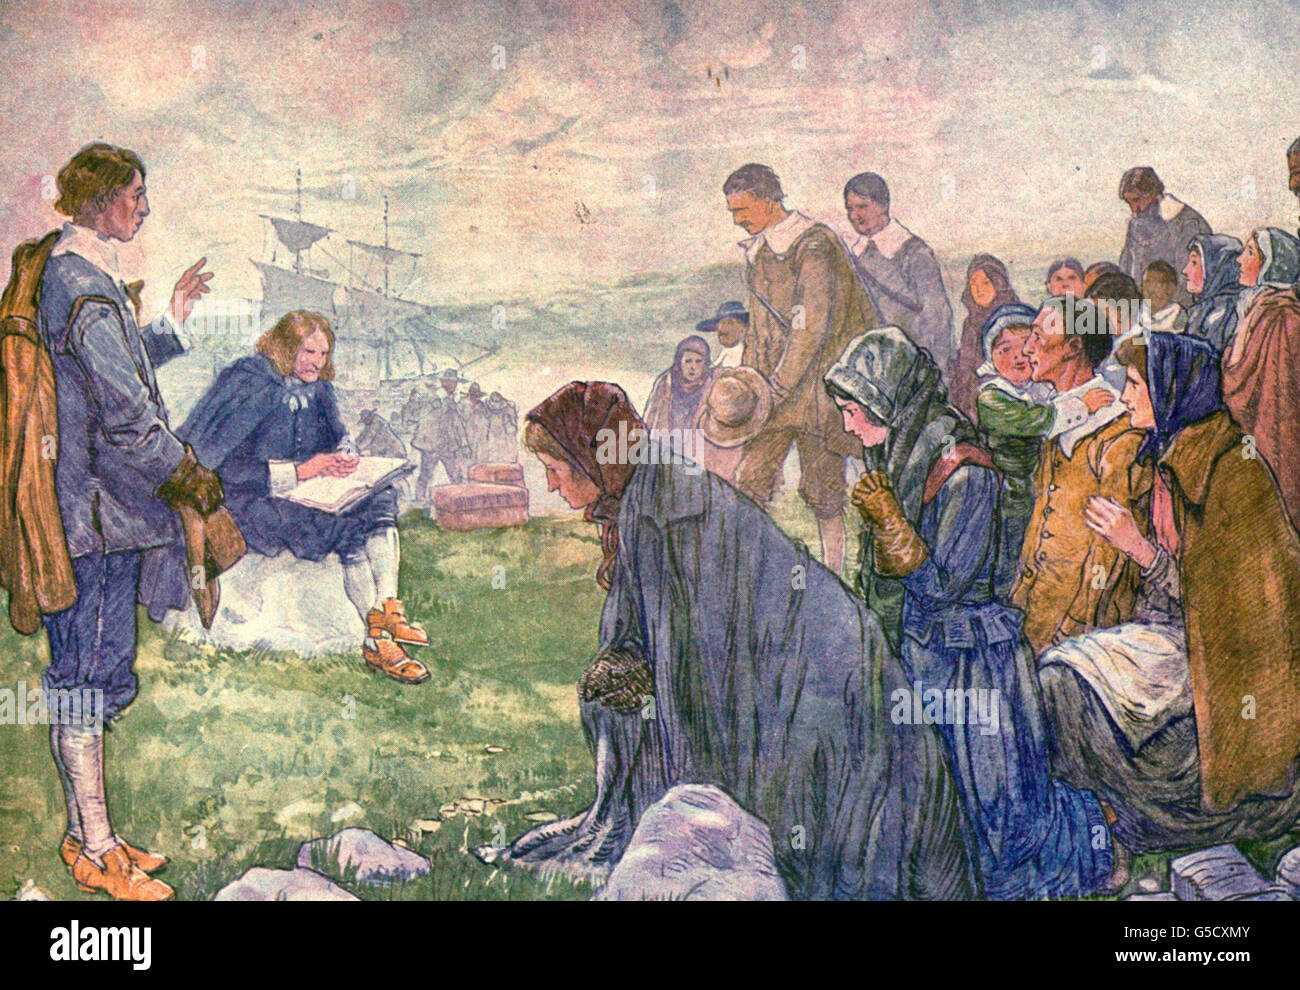 On the 23rd of December, 1620, the Pilgrims landed at the Cornerstone of a nation, Plymouth Rock Stock Photo